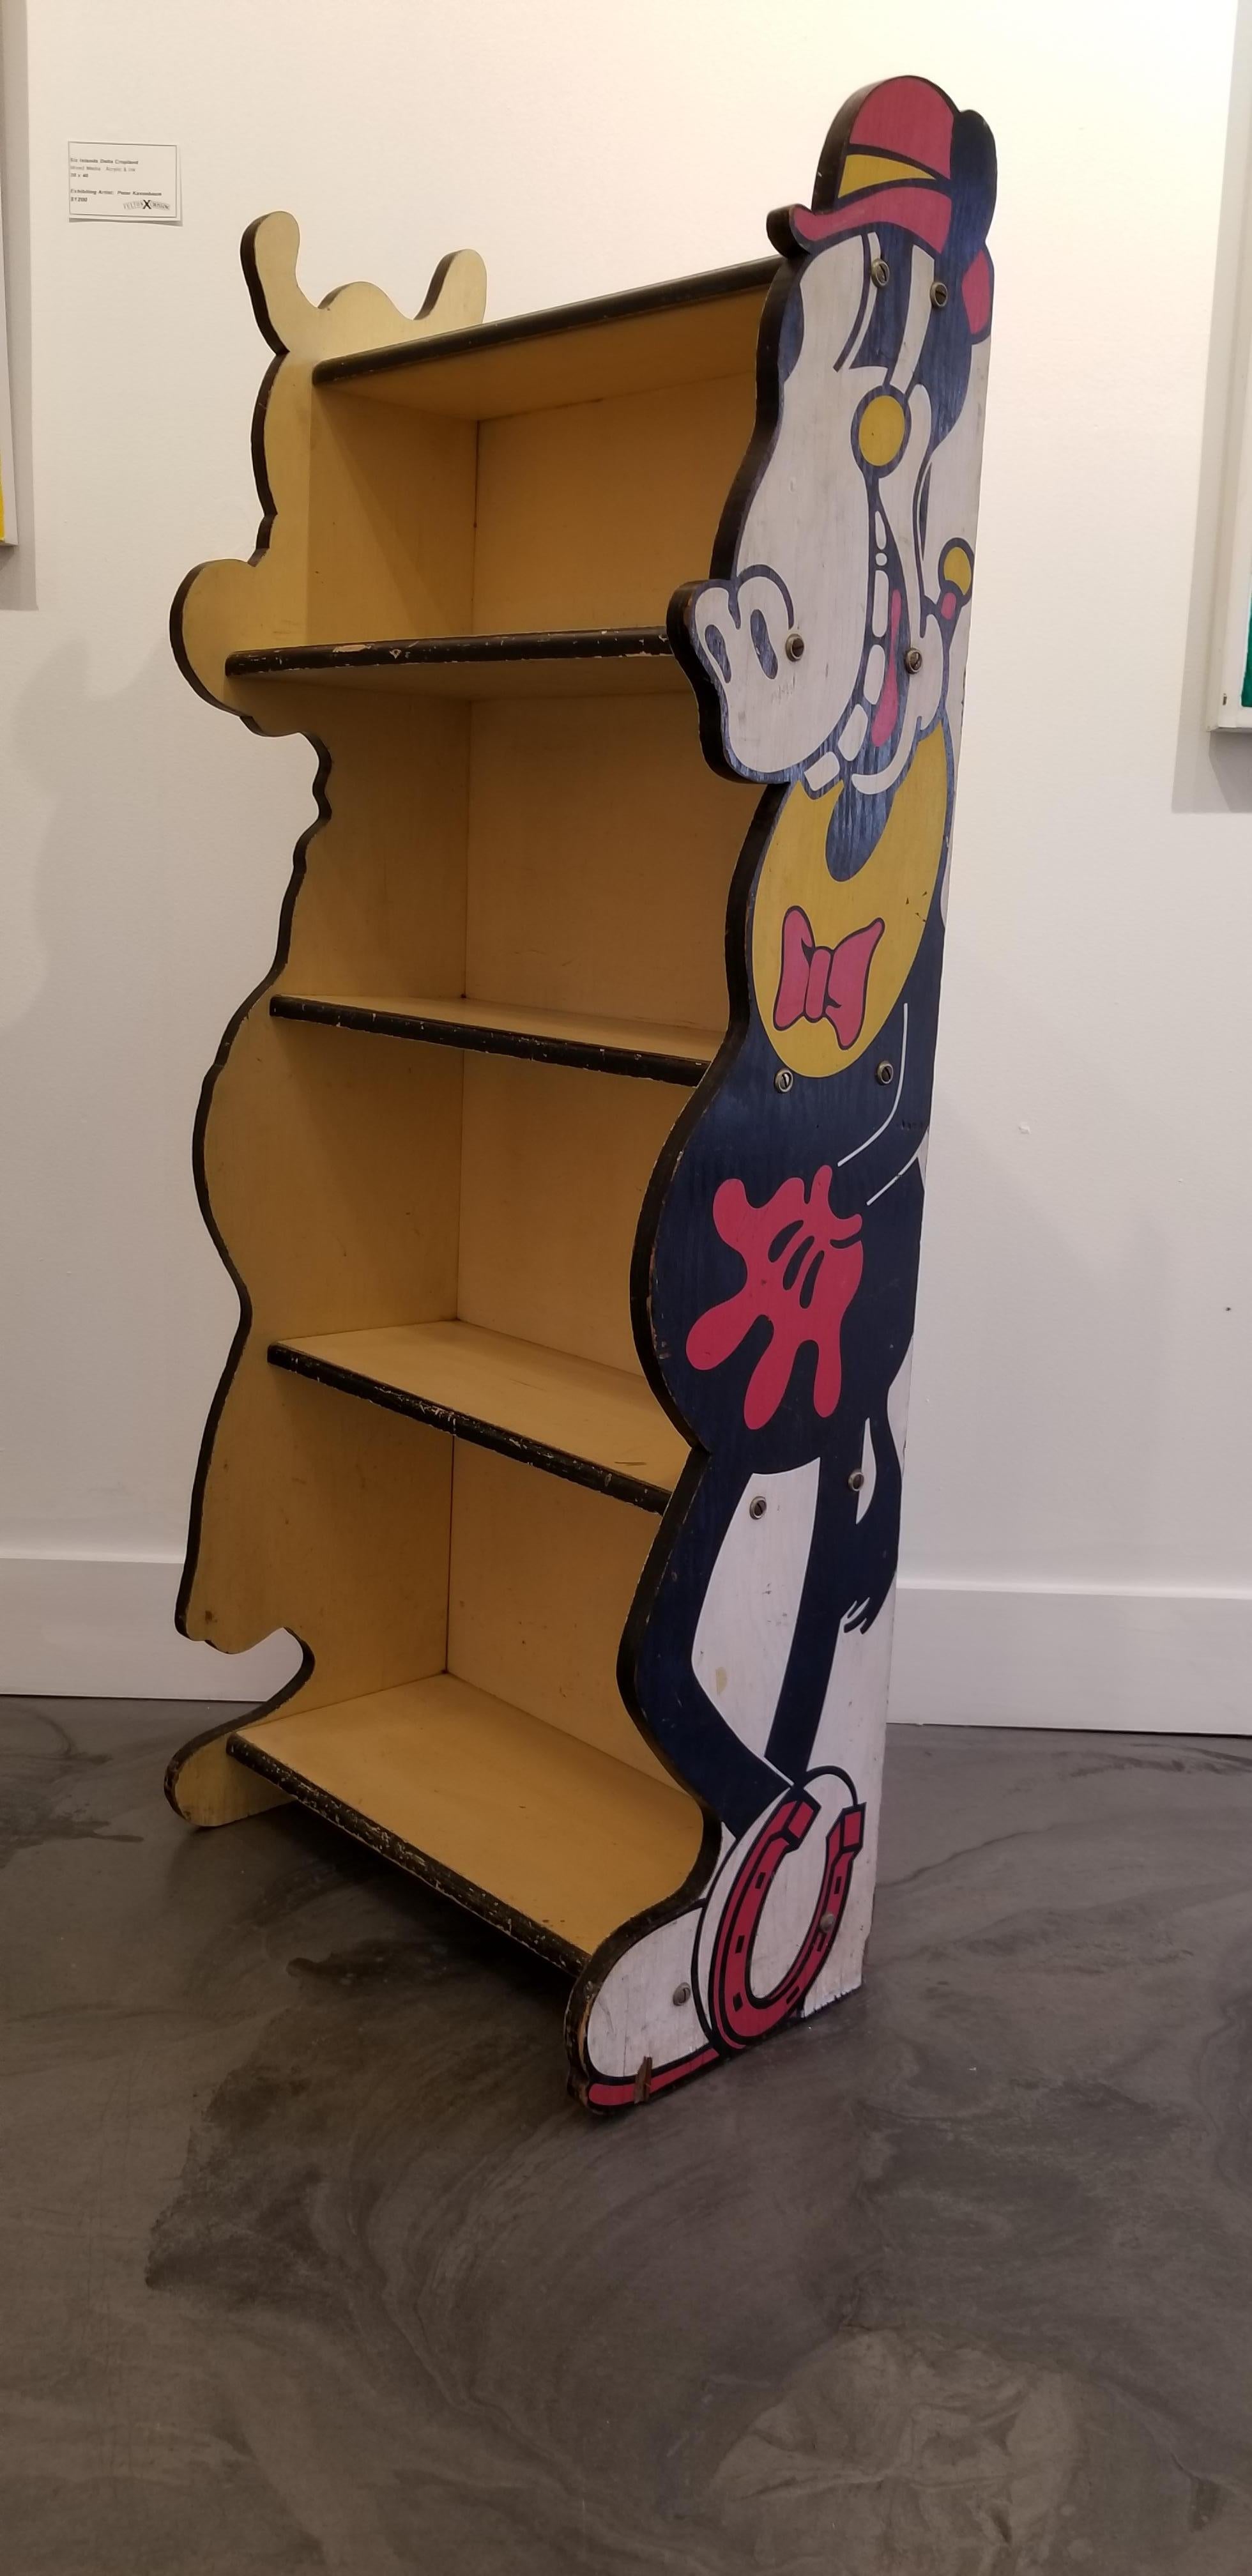 A rare hand painted bookshelf licensed by Walt Disney Productions and manufactured by Kroehler Mfg. Co., circa 1935-1955. Sides feature full body depictions of Horace Horsecollar and Clarabelle Cow. Original condition and original paint with some